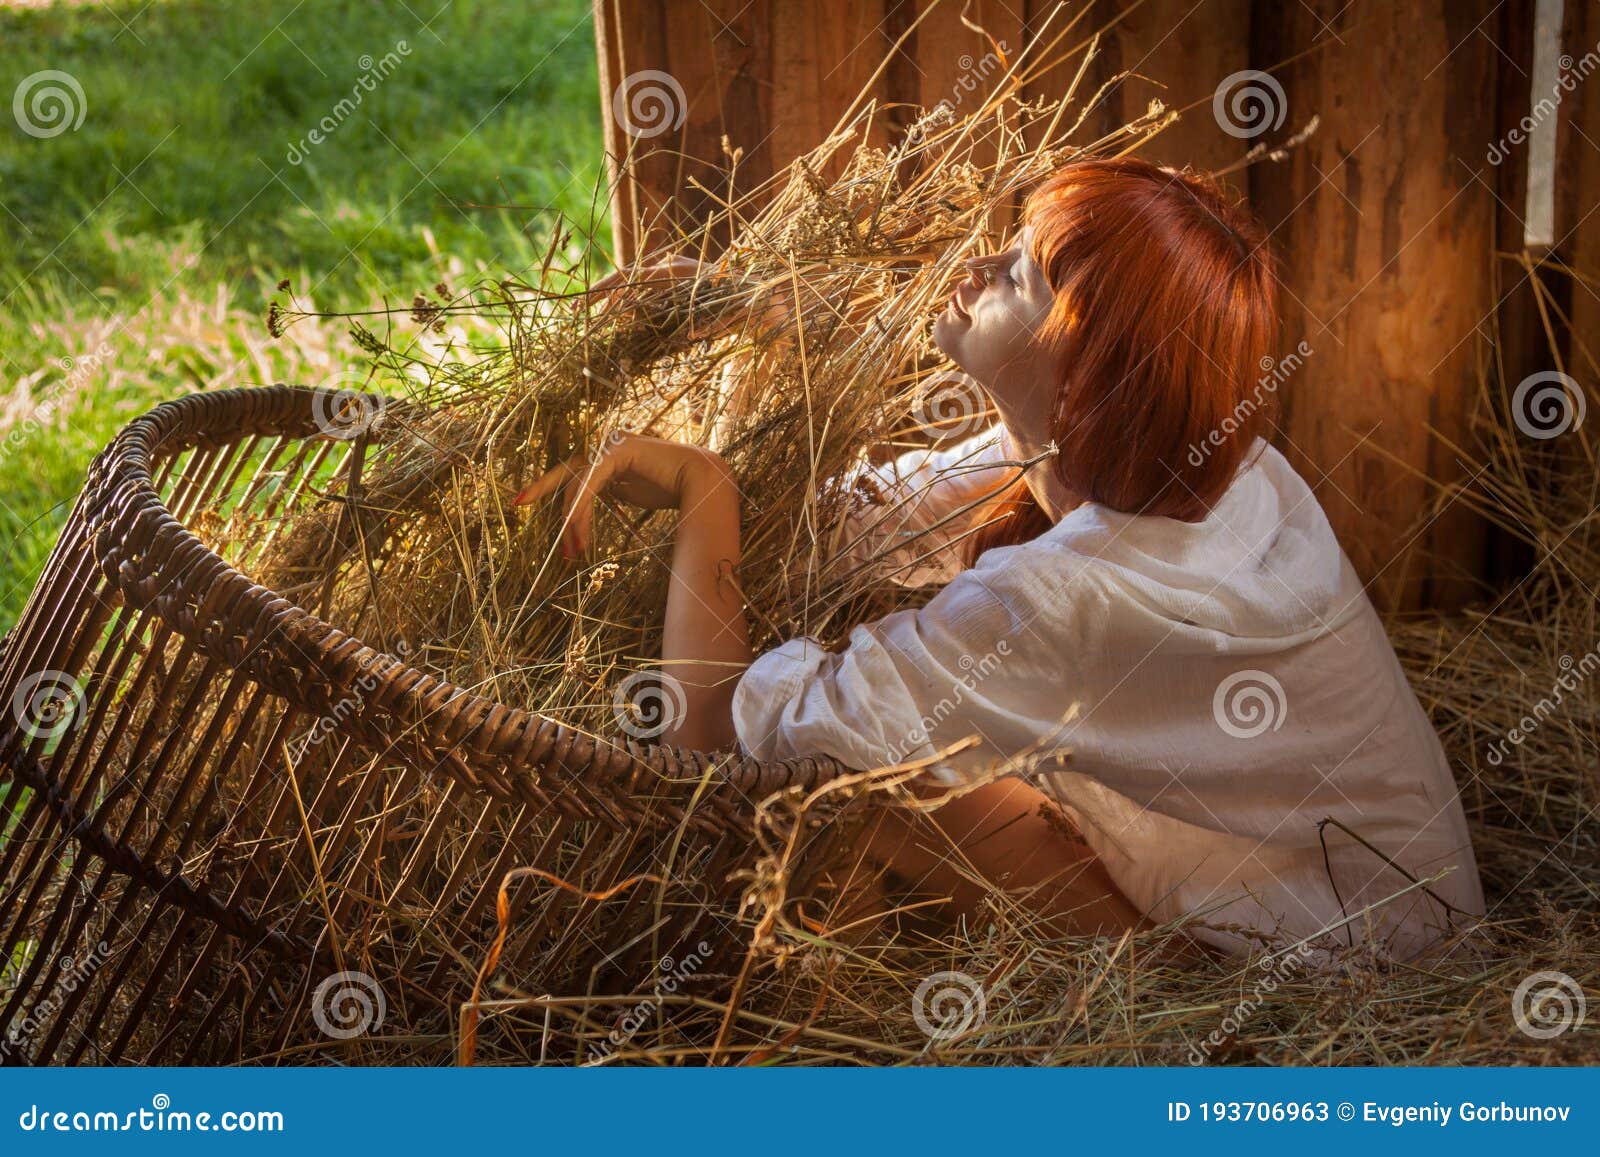 1600px x 1156px - Village Sex, Young Girl with Red Hair in White Shirt Sitting Near To a  Basket of Hay in the Barn in Motning Sunlight Stock Image - Image of girl,  leisure: 193706963